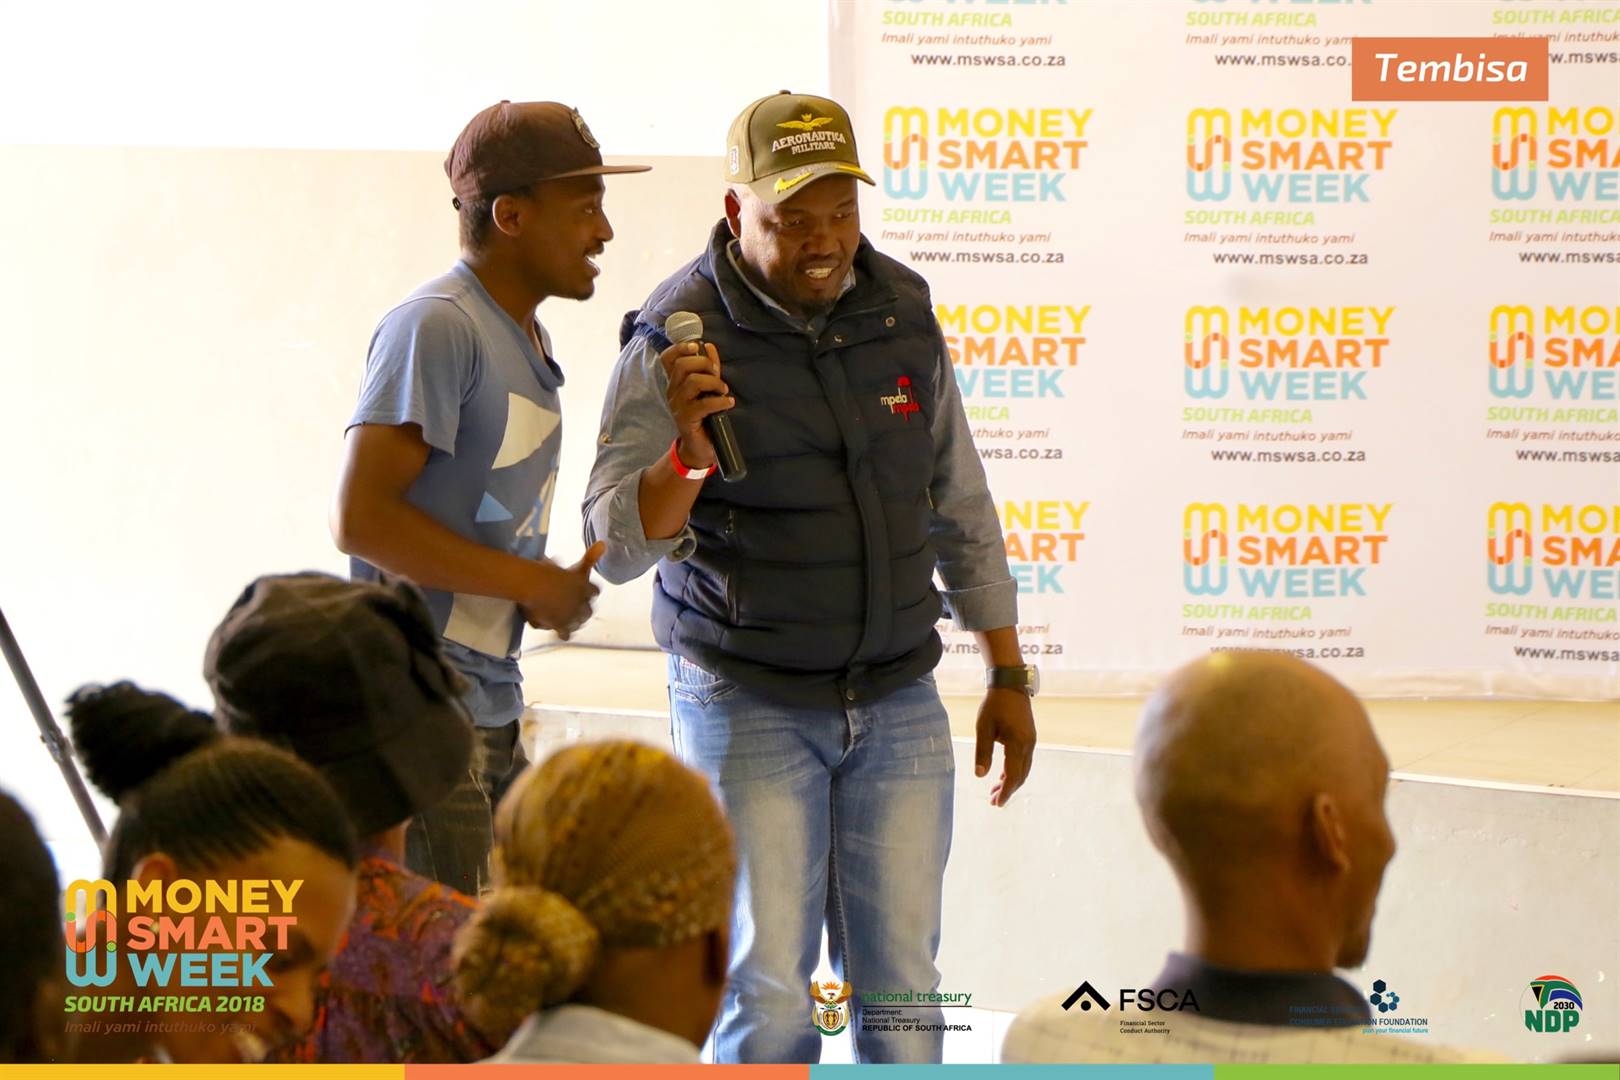 Money Smart Week 2018 activation in Tembisa. Picture: Supplied